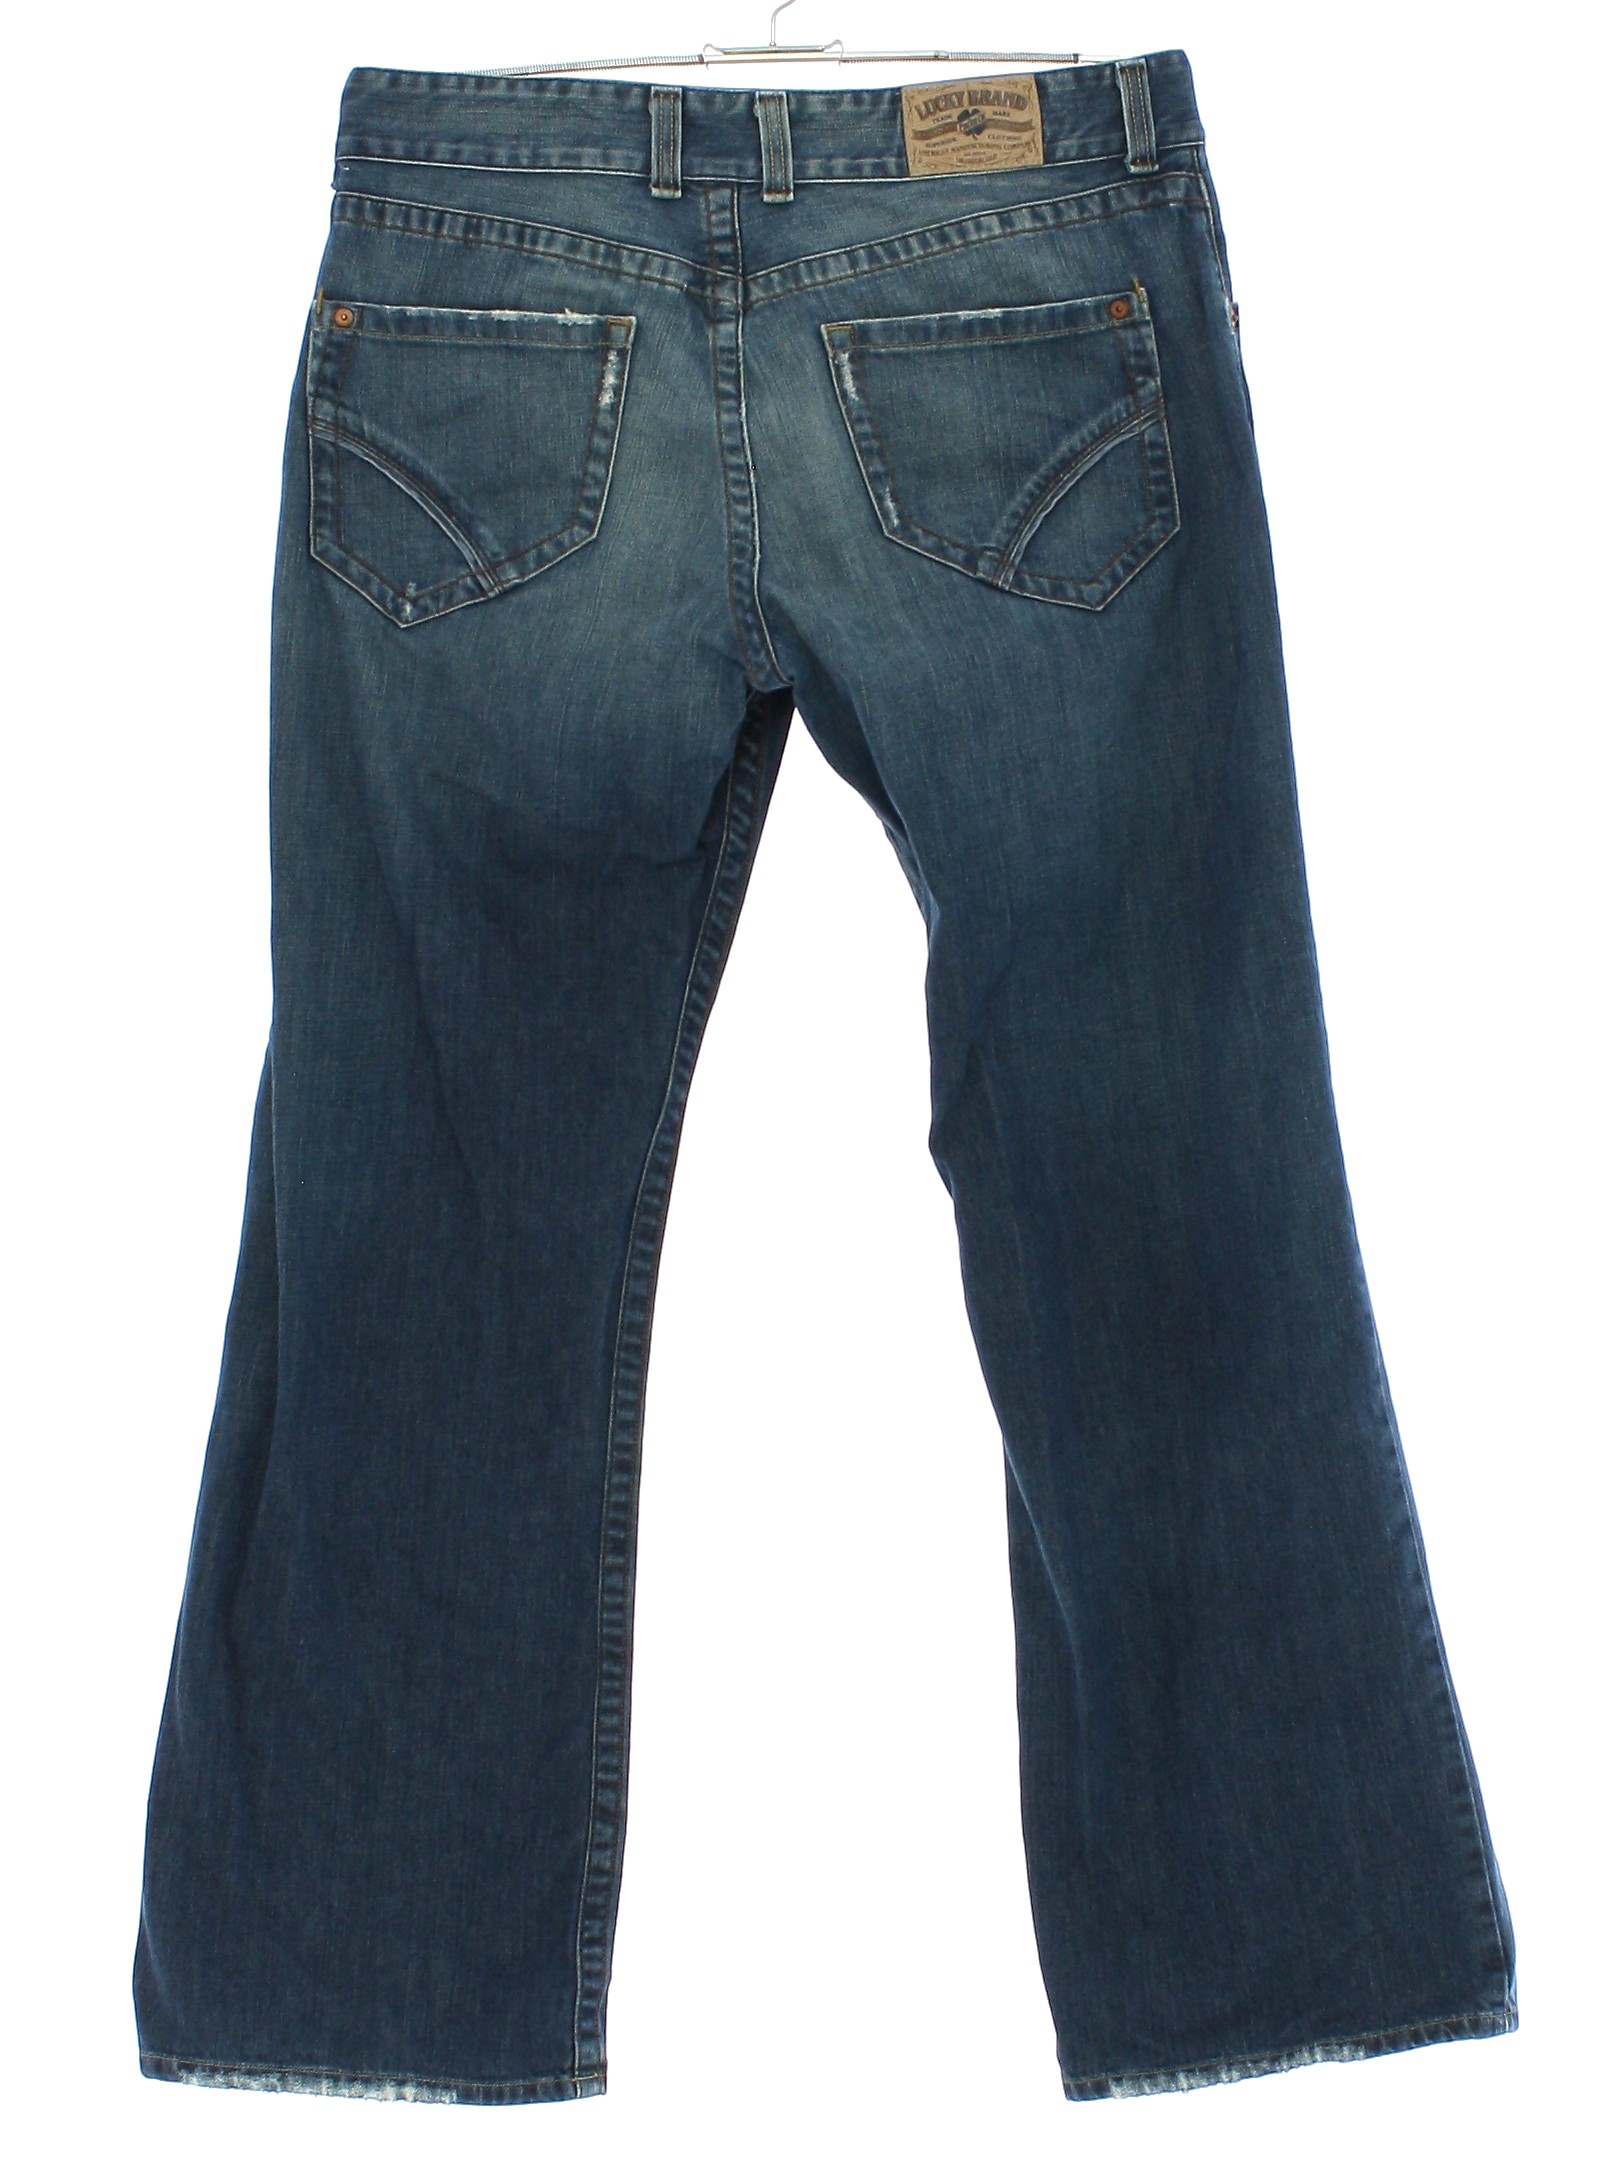 Flared Pants / Flares: 90s (Late y2k 2000s, 2007) -Lucky Brand Jeans ...